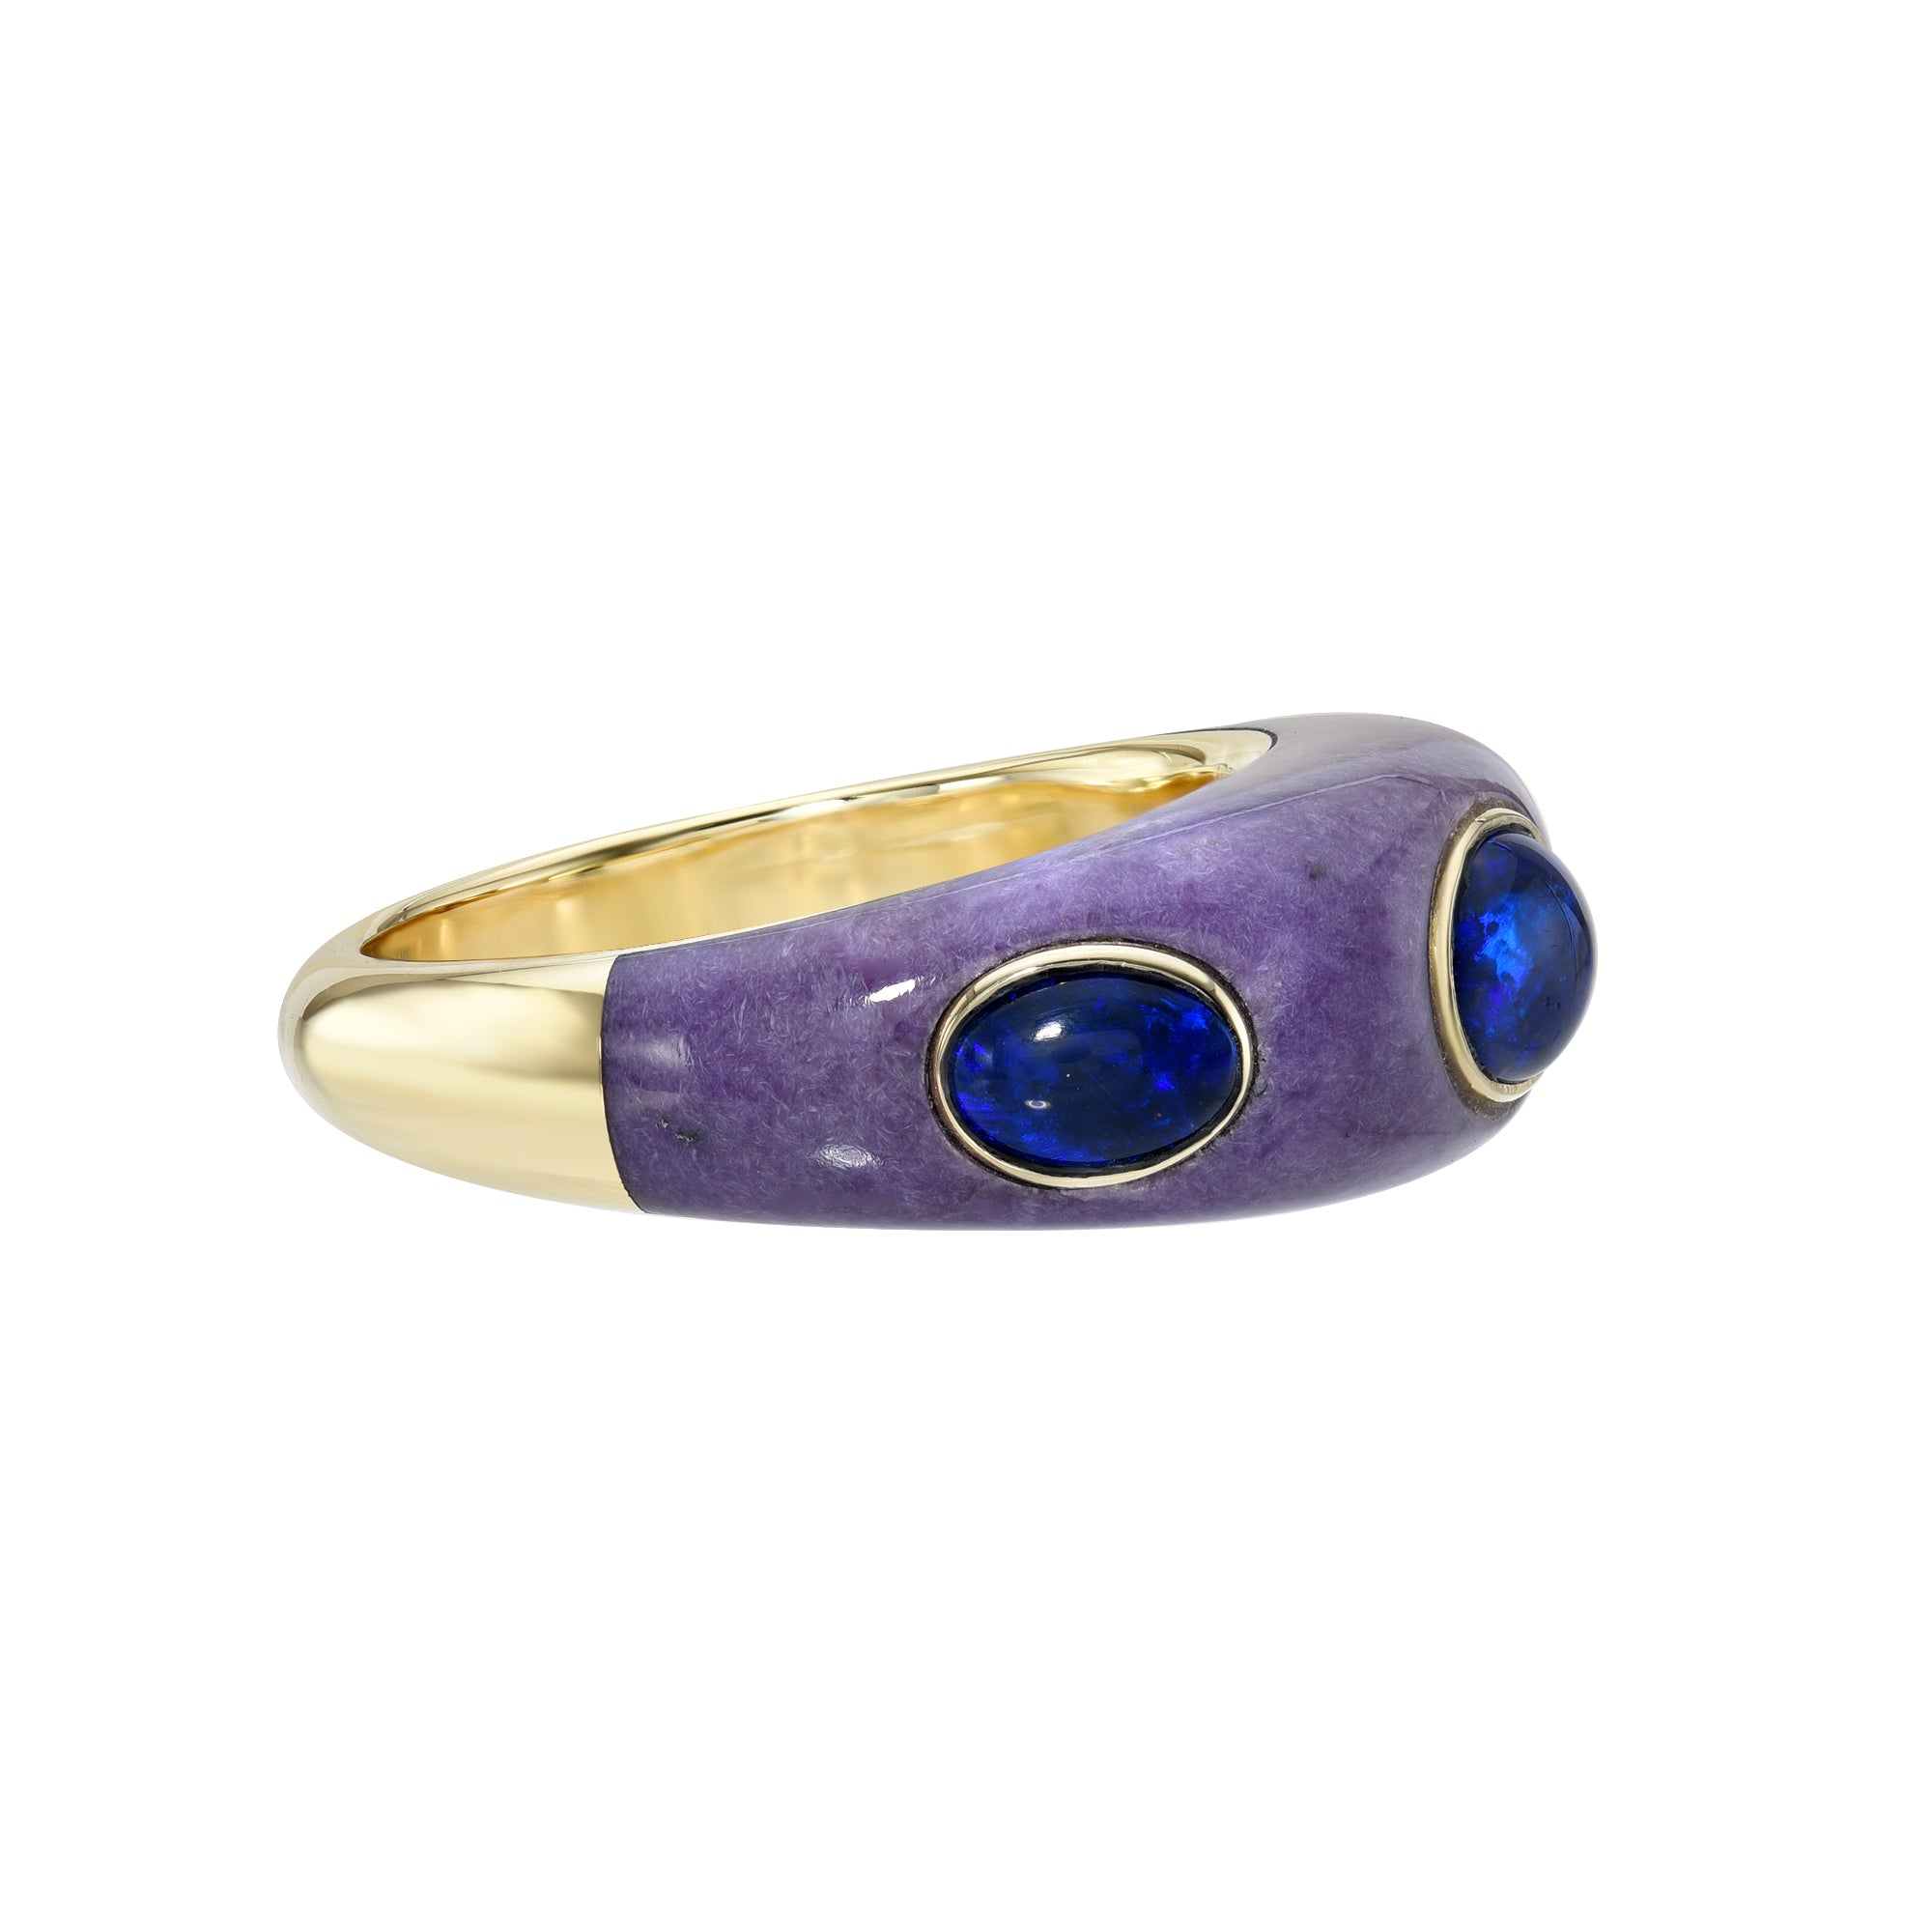 Twilight Opal Ring by Meredith Young available at Talisman Collection Fine Jewelers in El Dorado Hills, CA and online. A spellbinding blend of modern design and moody elegance, the Twilight Opal Ring is mesmerizing...  Its domed sugilite base provides a deep and mysterious backdrop and is enhanced by three cabochon oval Australian opals set in radiant 18k yellow gold. This ring is not merely jewelry; it's a statement piece that radiates an aura of compelling mystique.